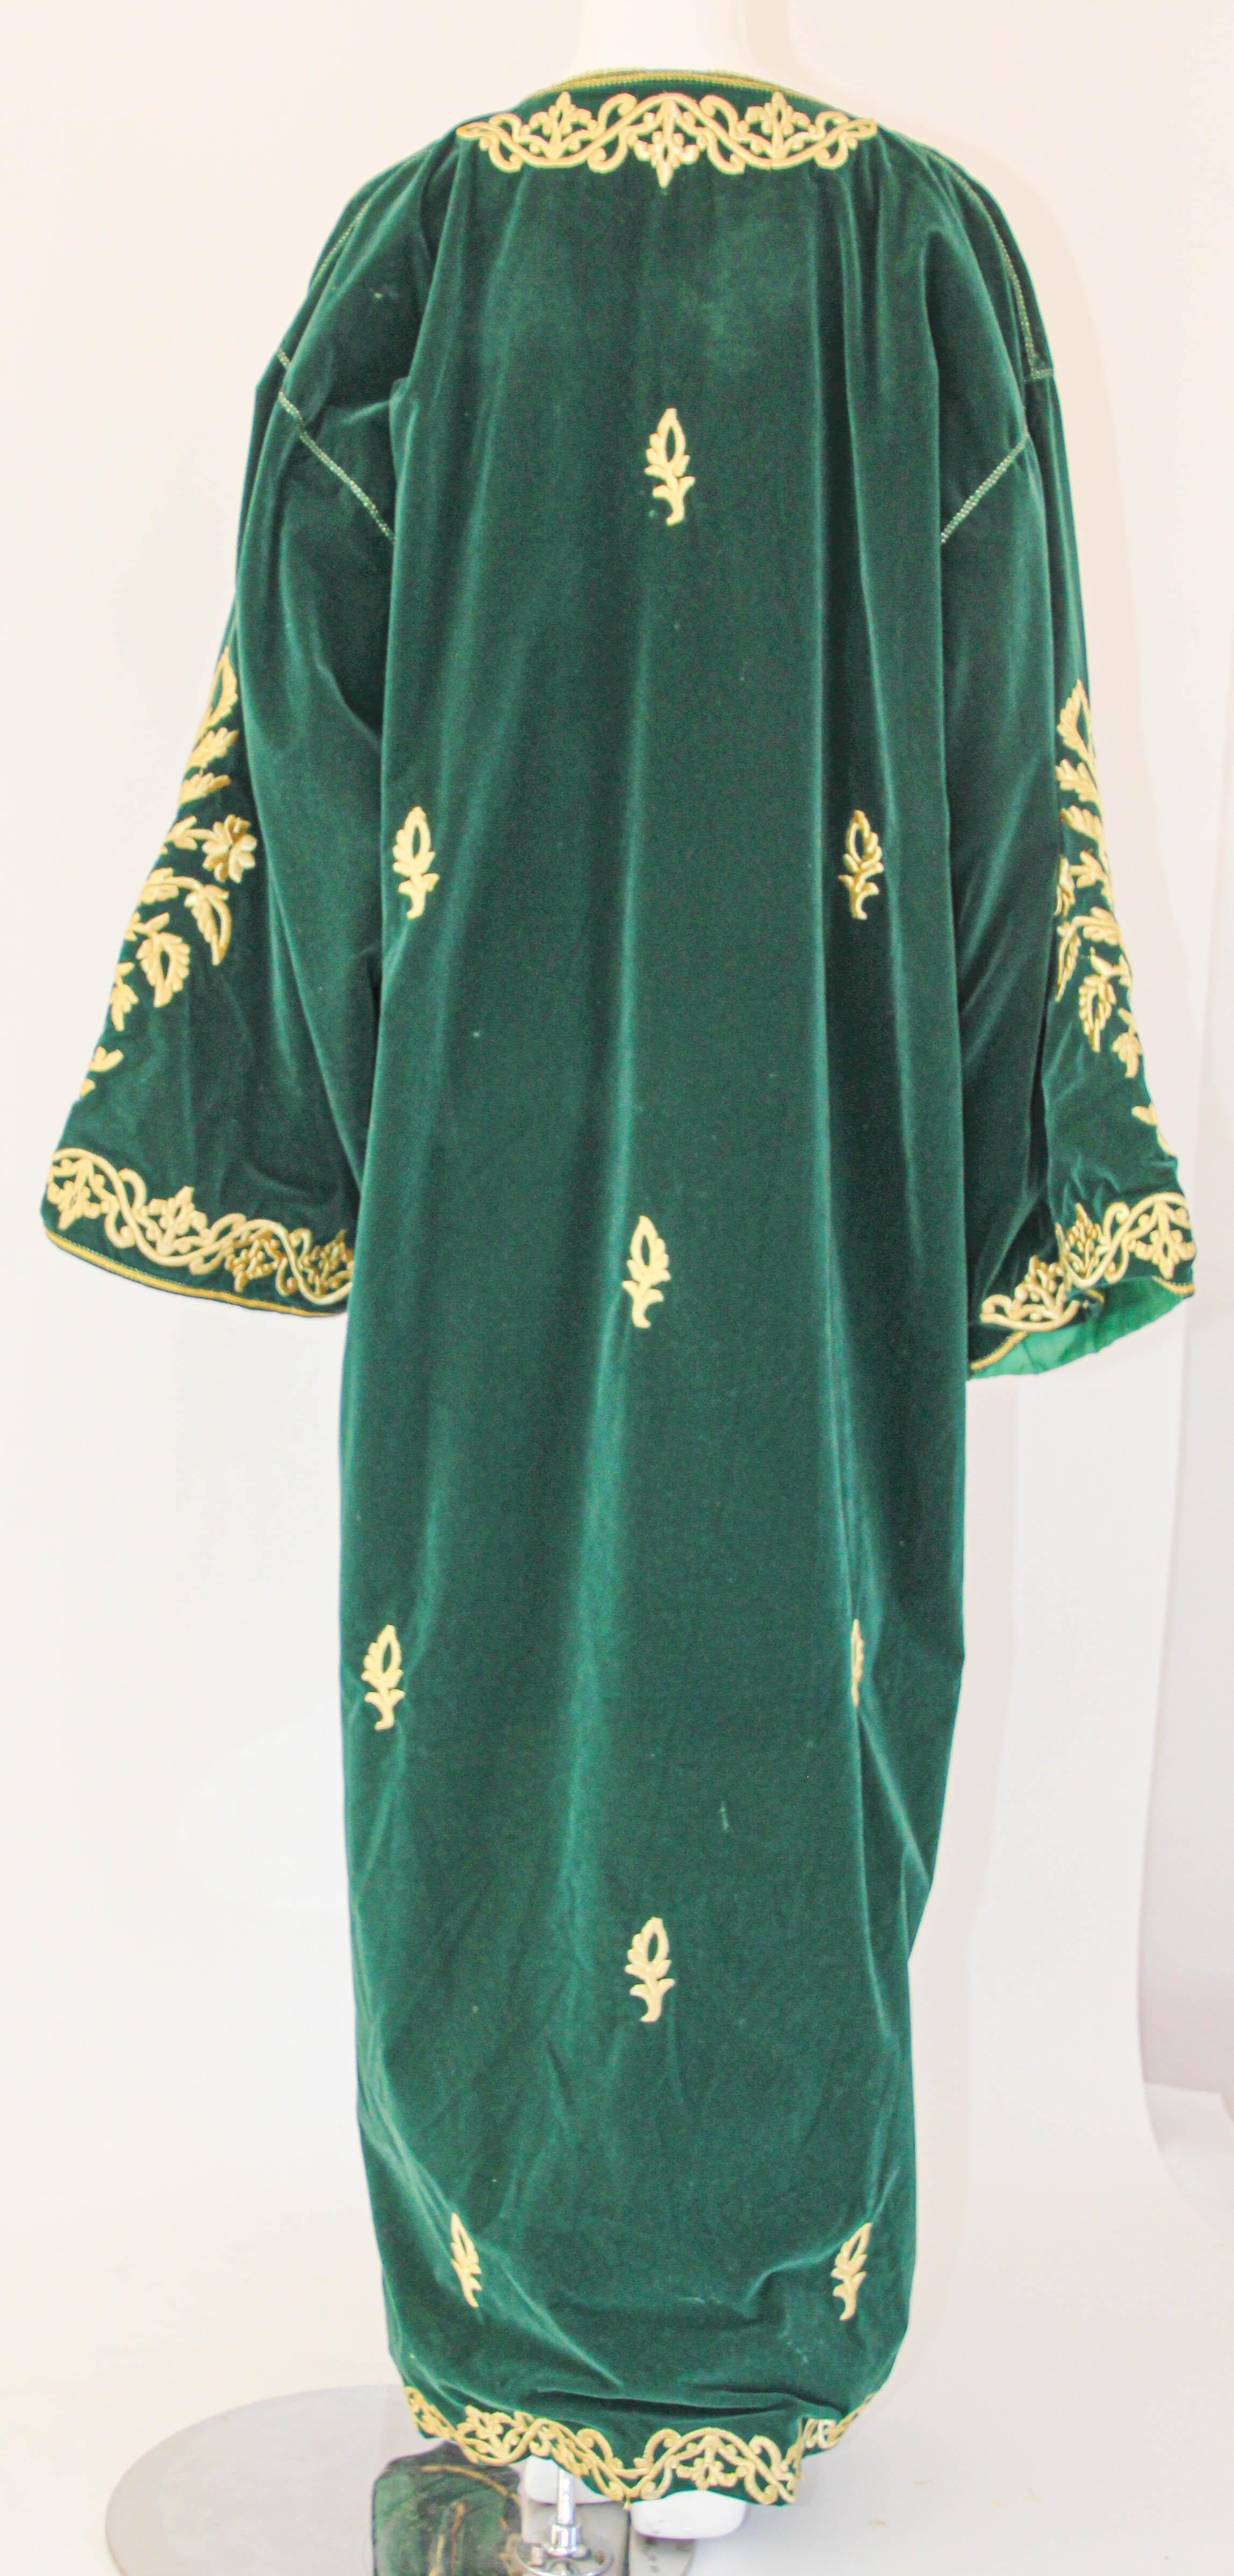 1960s Vintage Moroccan Velvet Caftan Emerald Green and Gold Thread For Sale 7